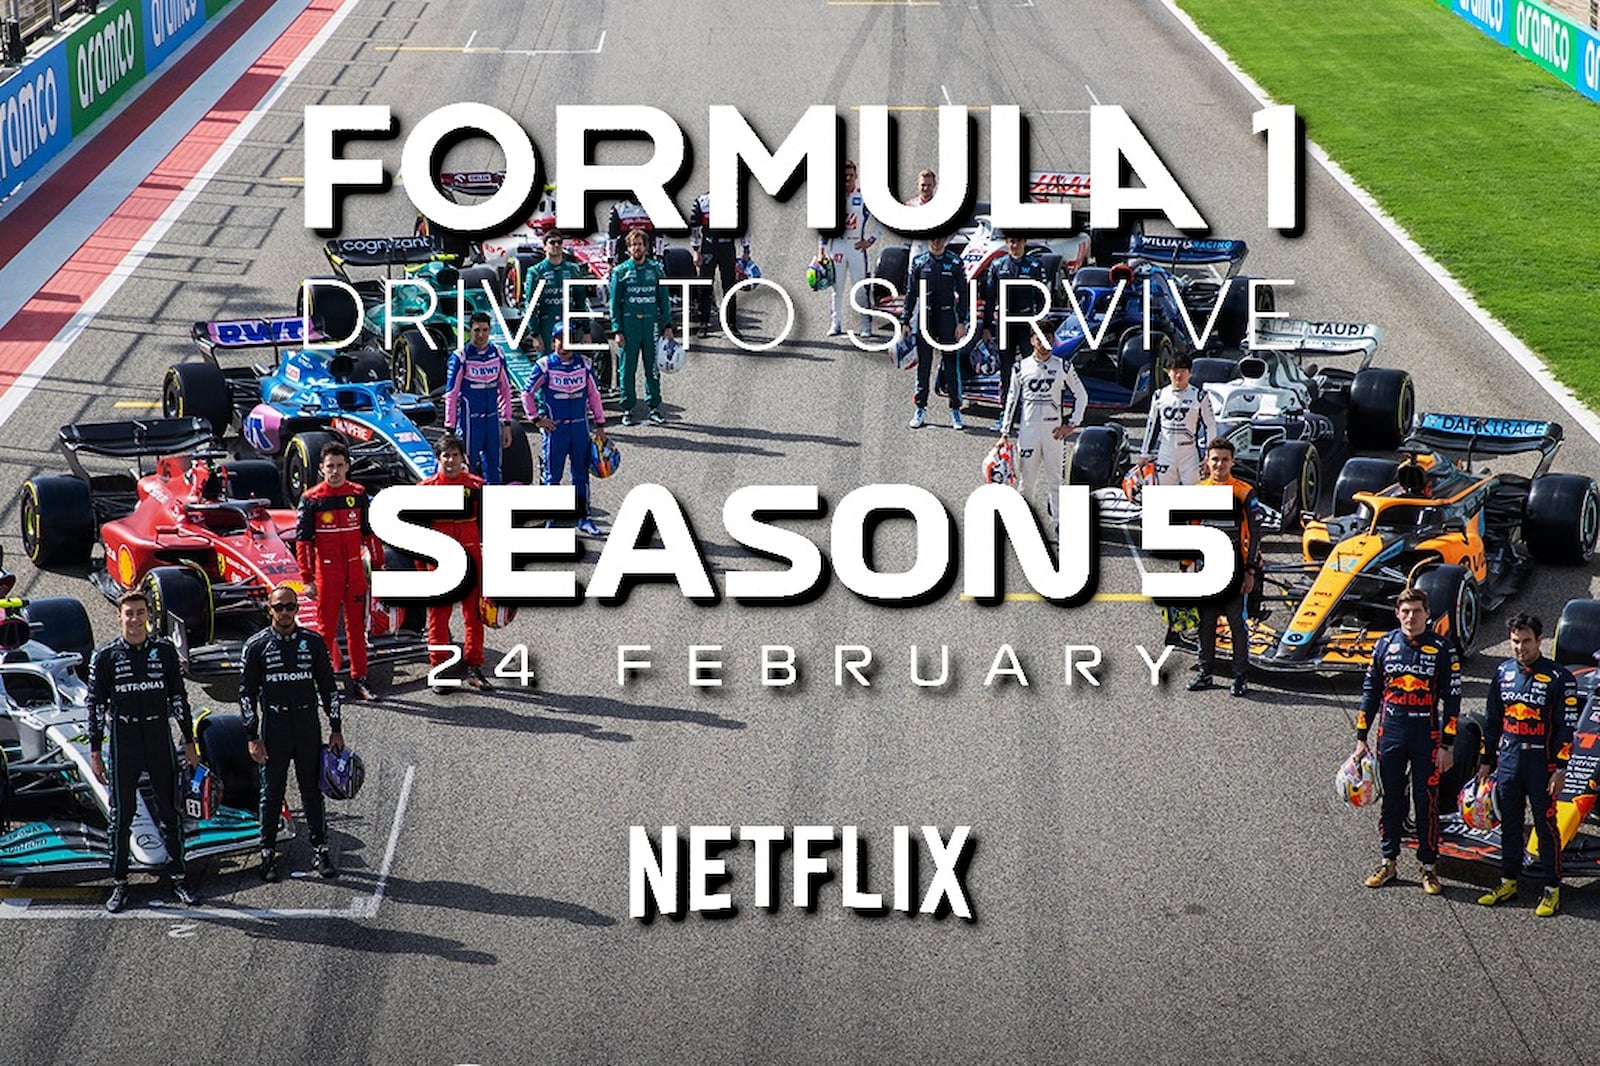 This Is When You Can Watch Formula 1 Drive To Survive Season 5 CarBuzz